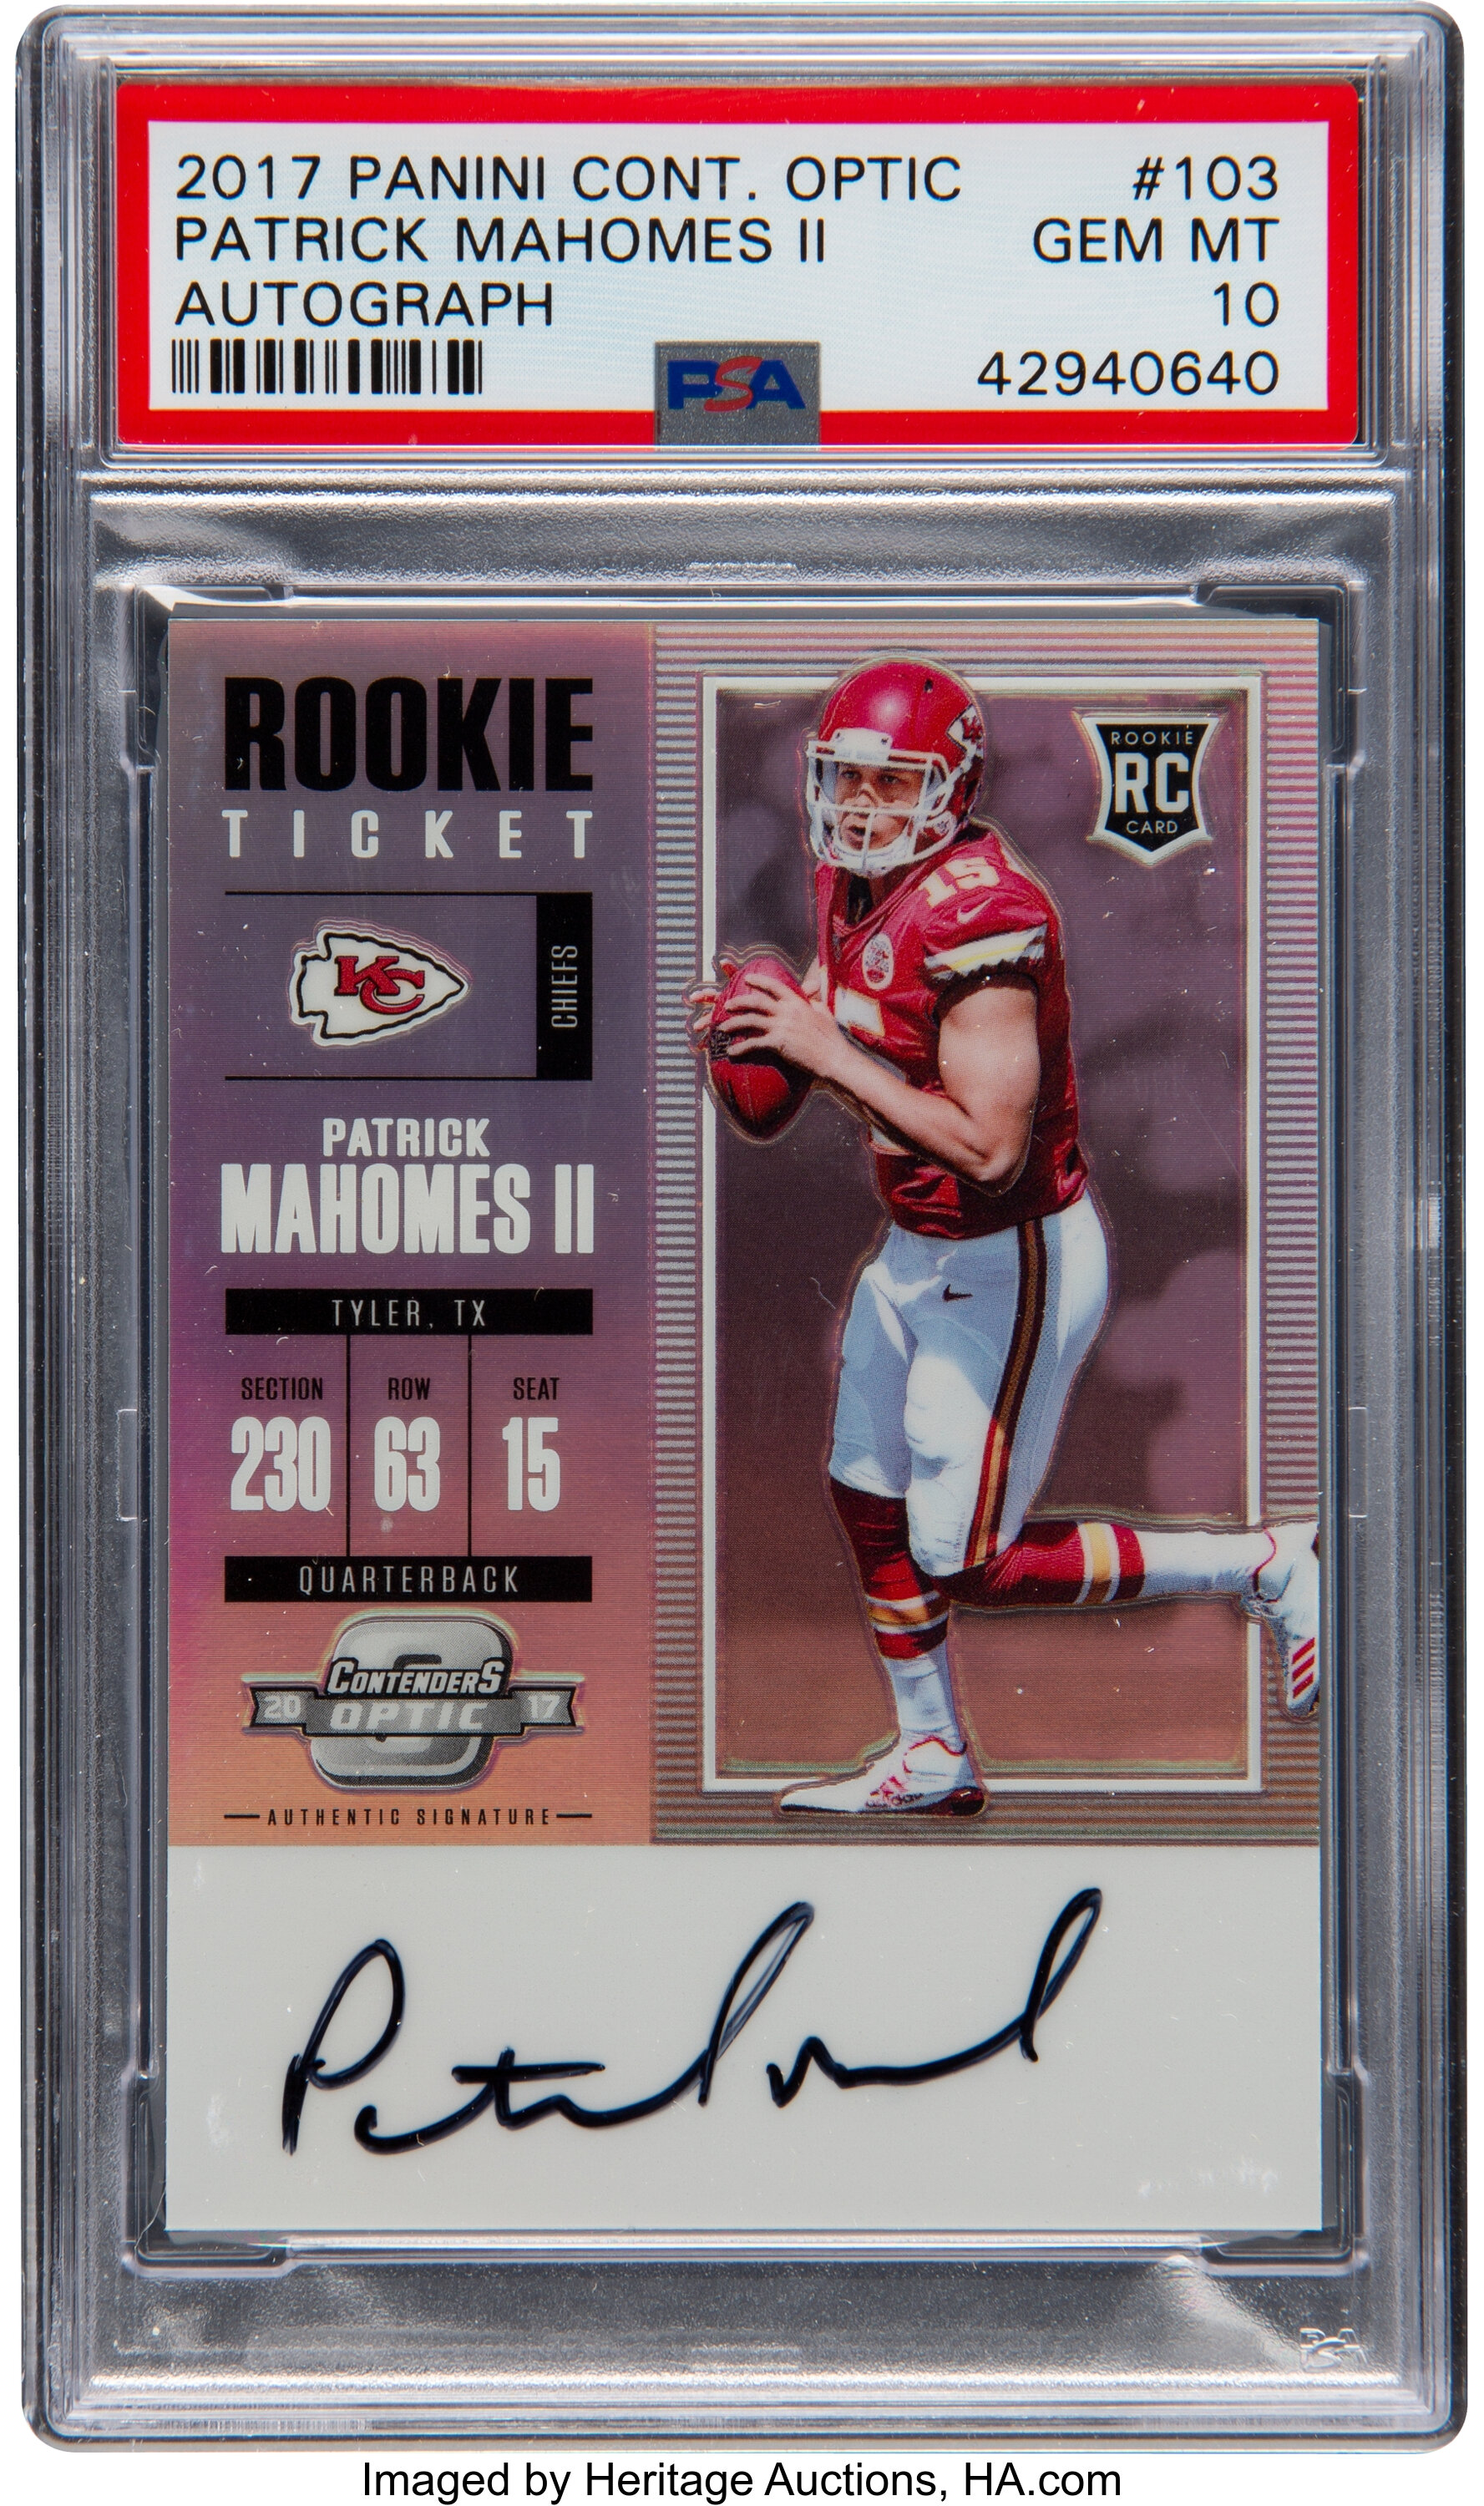 Sold at Auction: 2017 Donruss PATRICK MAHOMES II Rookie Threads Green - SGC  9.5 - MT+++